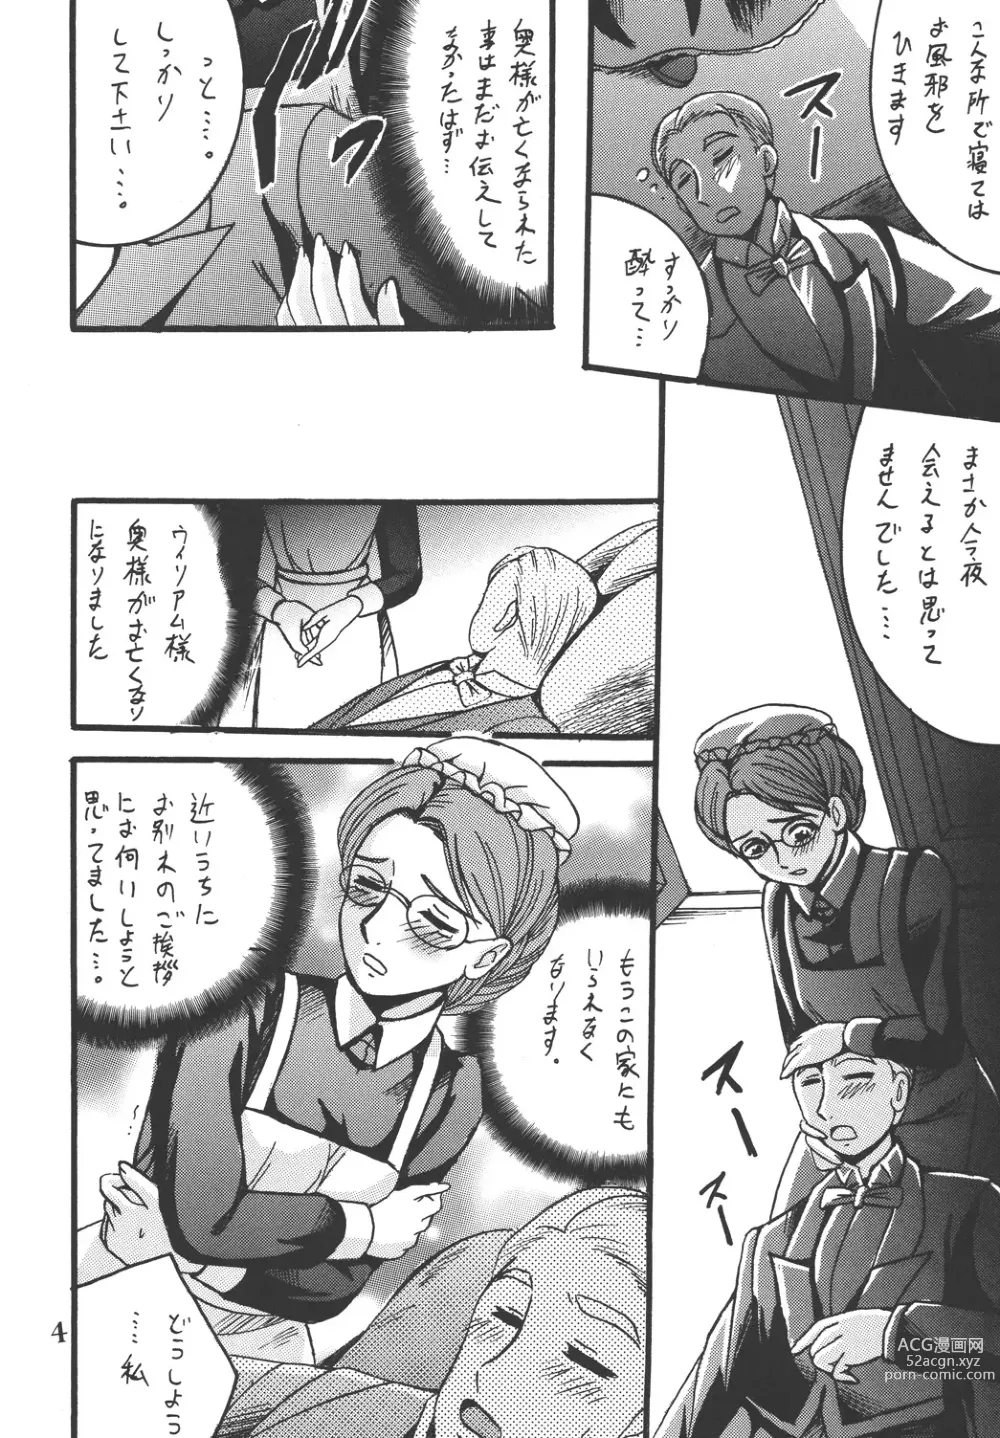 Page 4 of doujinshi Before the Emma Departure